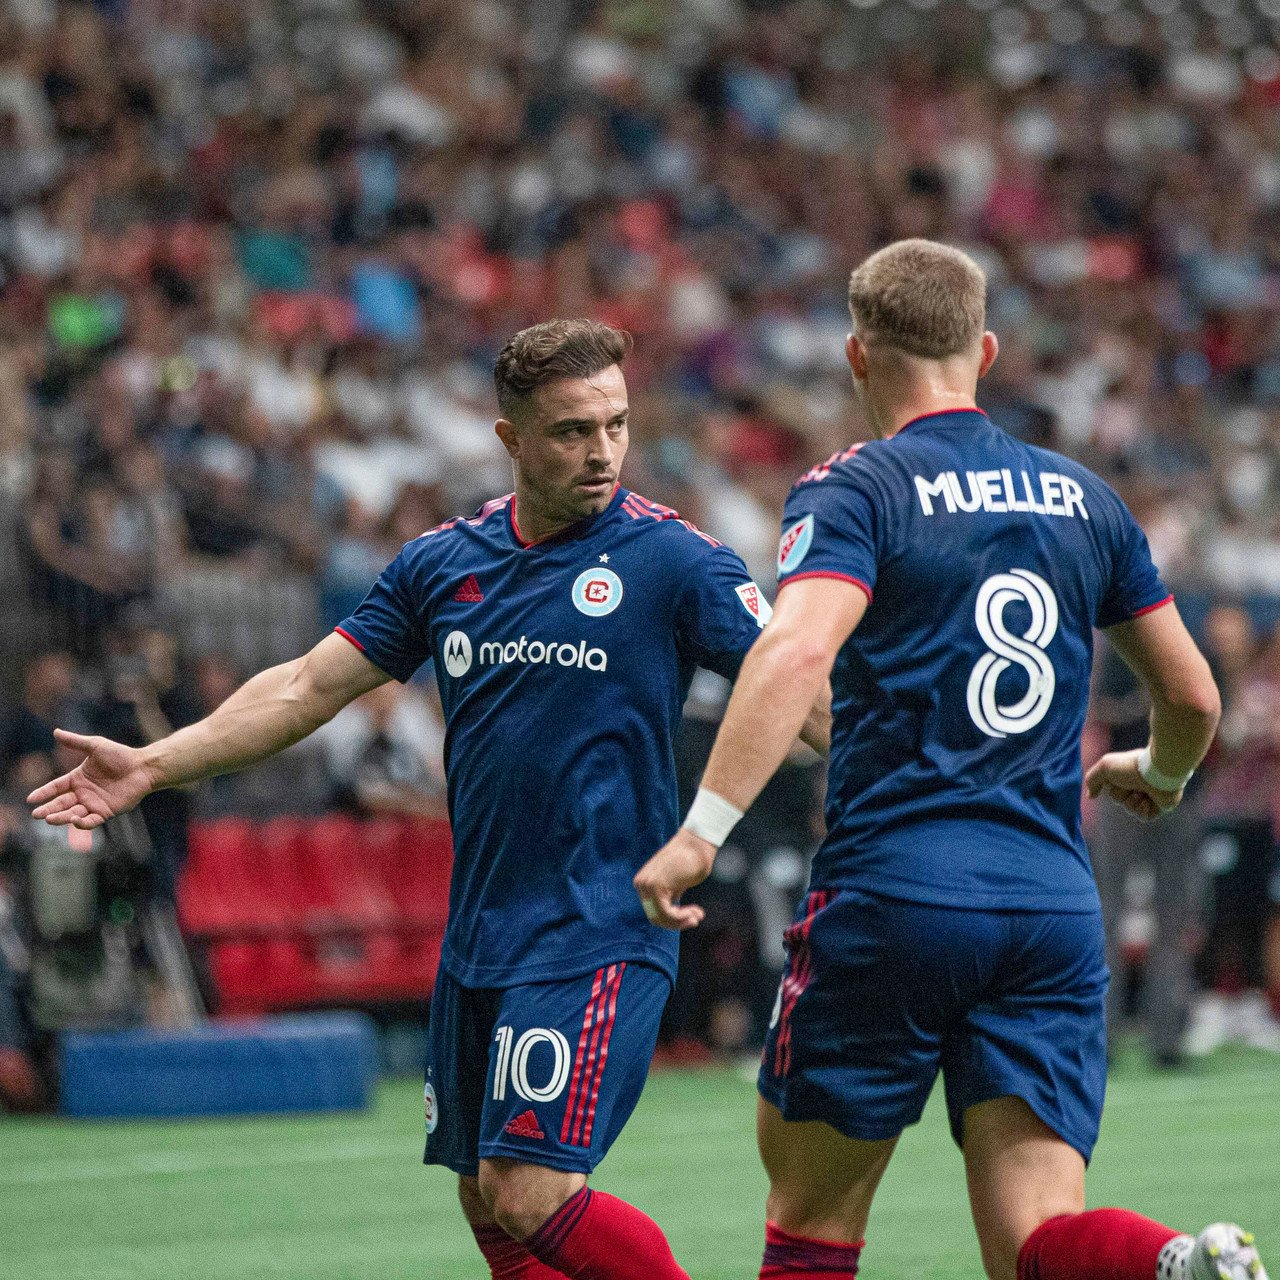 Vancouver Whitecaps 1-3 Chicago Fire: Big time players make big time plays